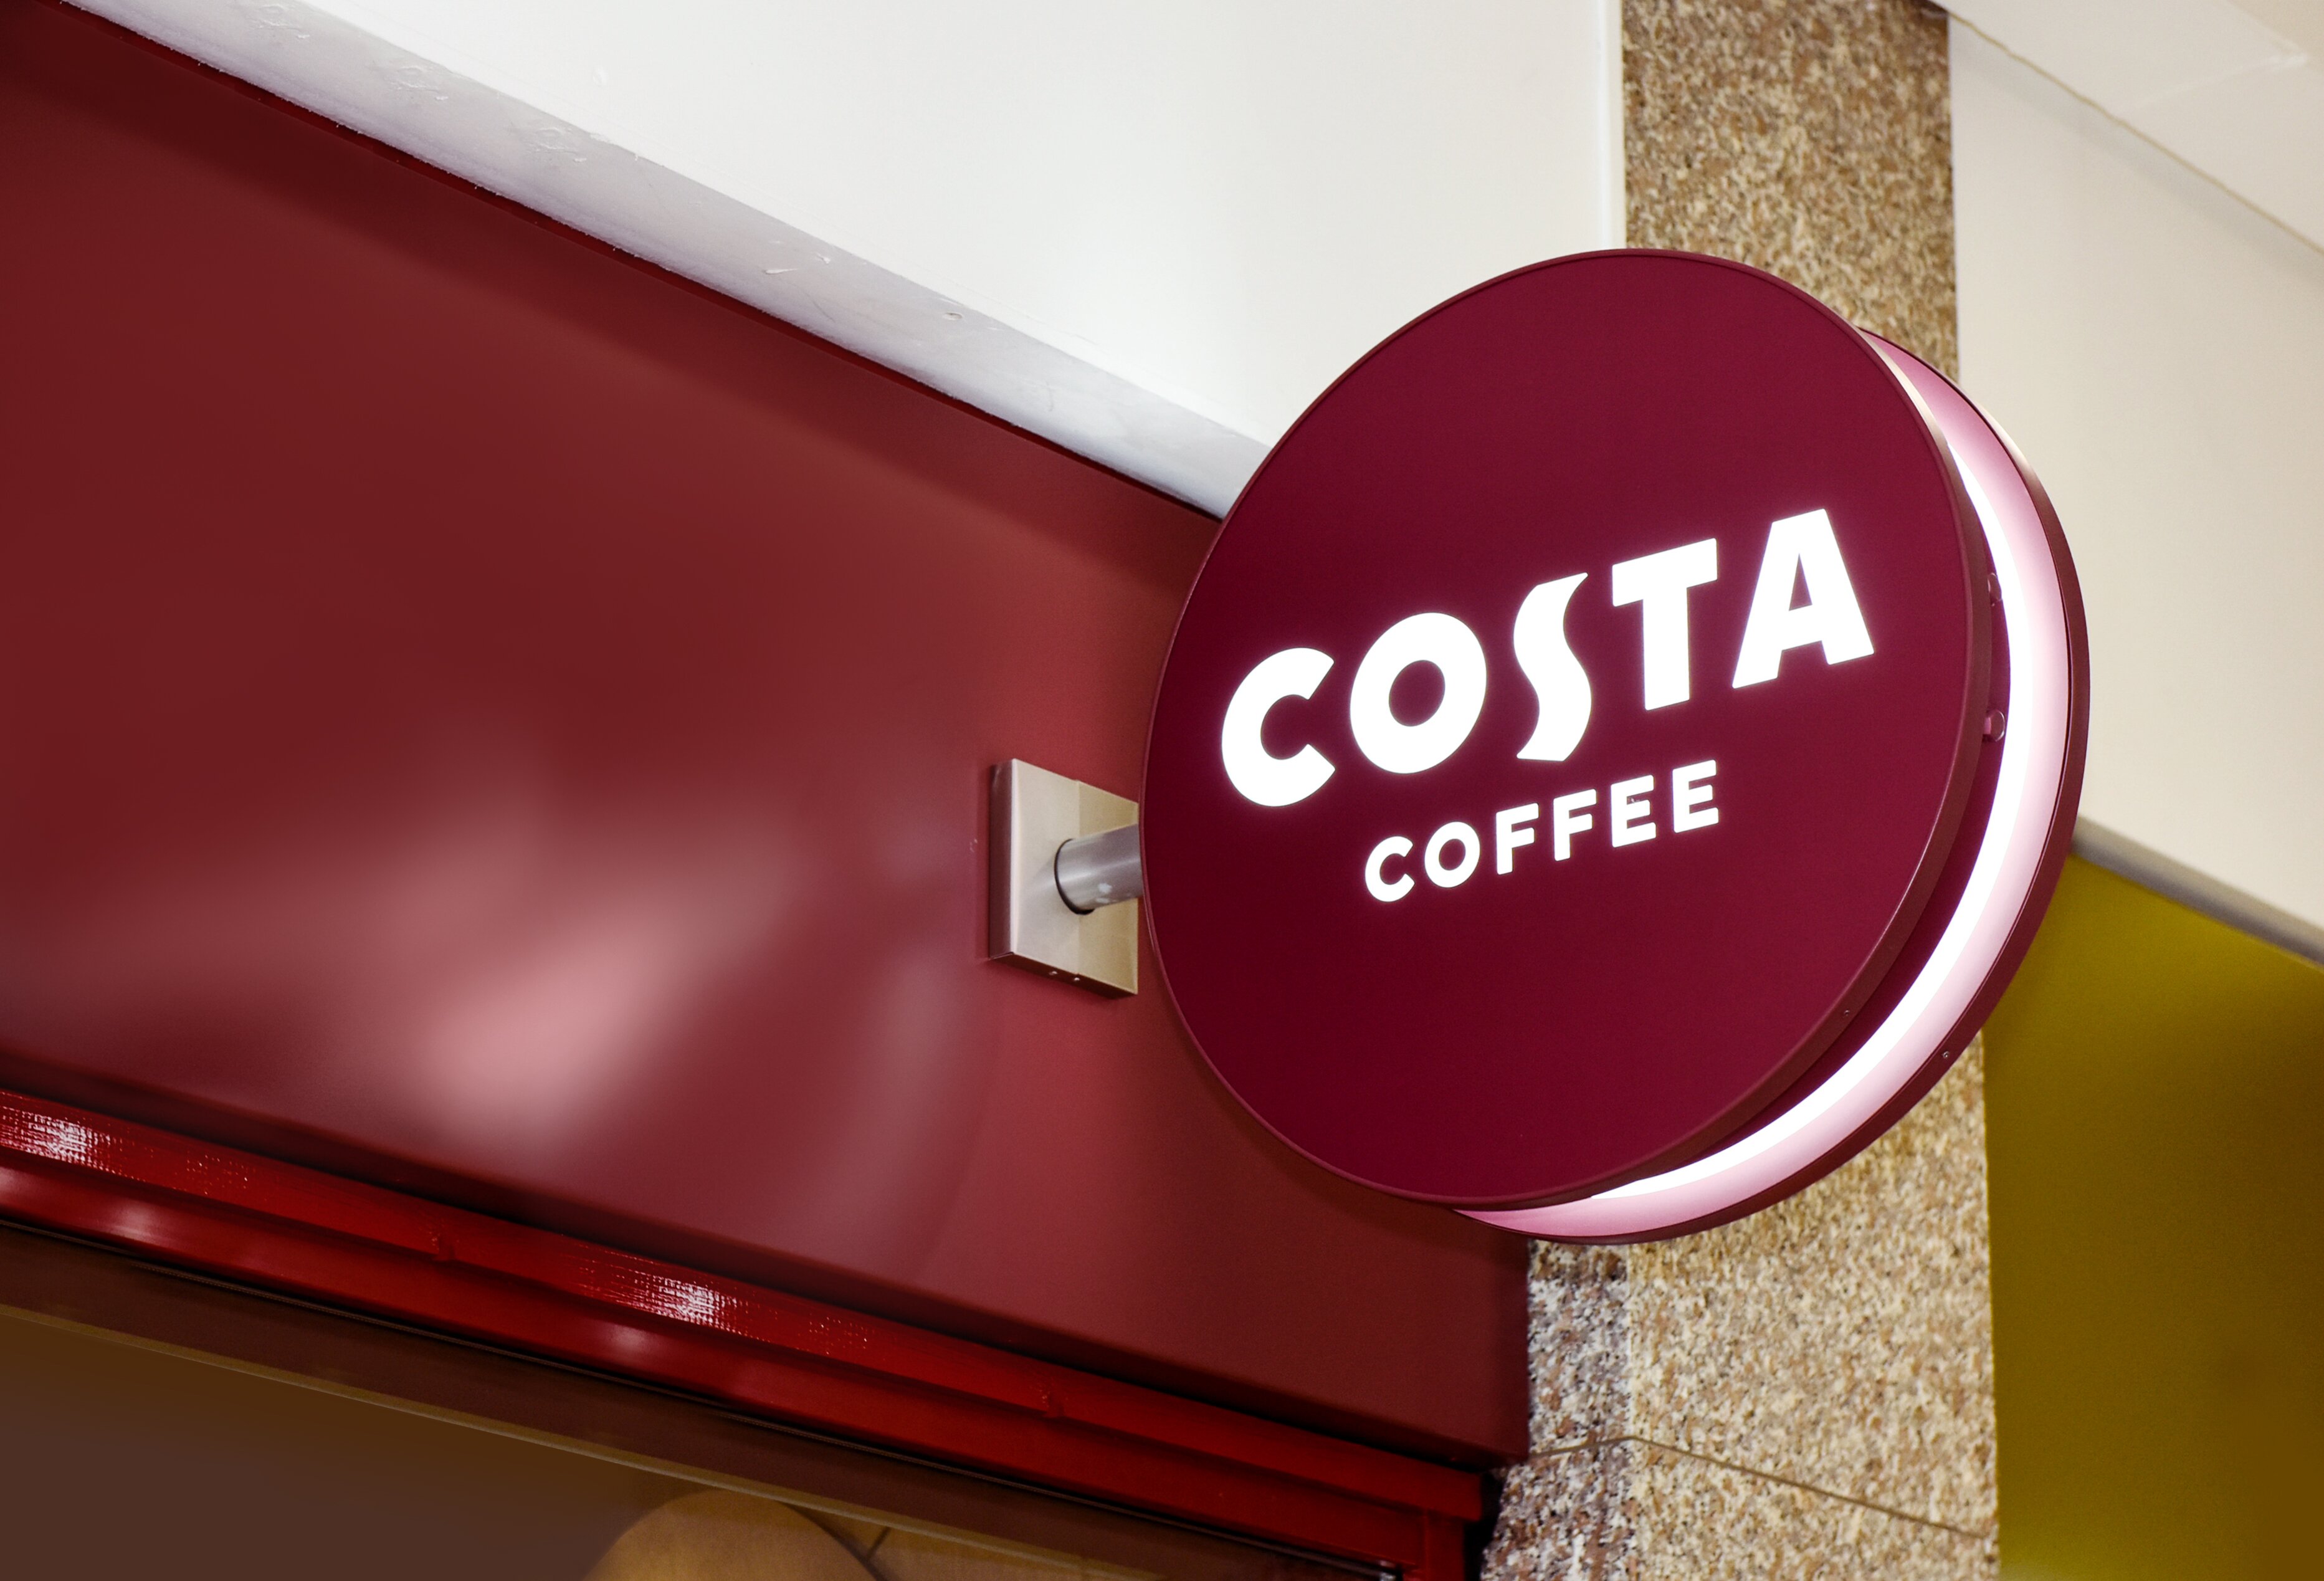 Costa cappuccino contains more caffeine than four cans of Red Bull, research shows